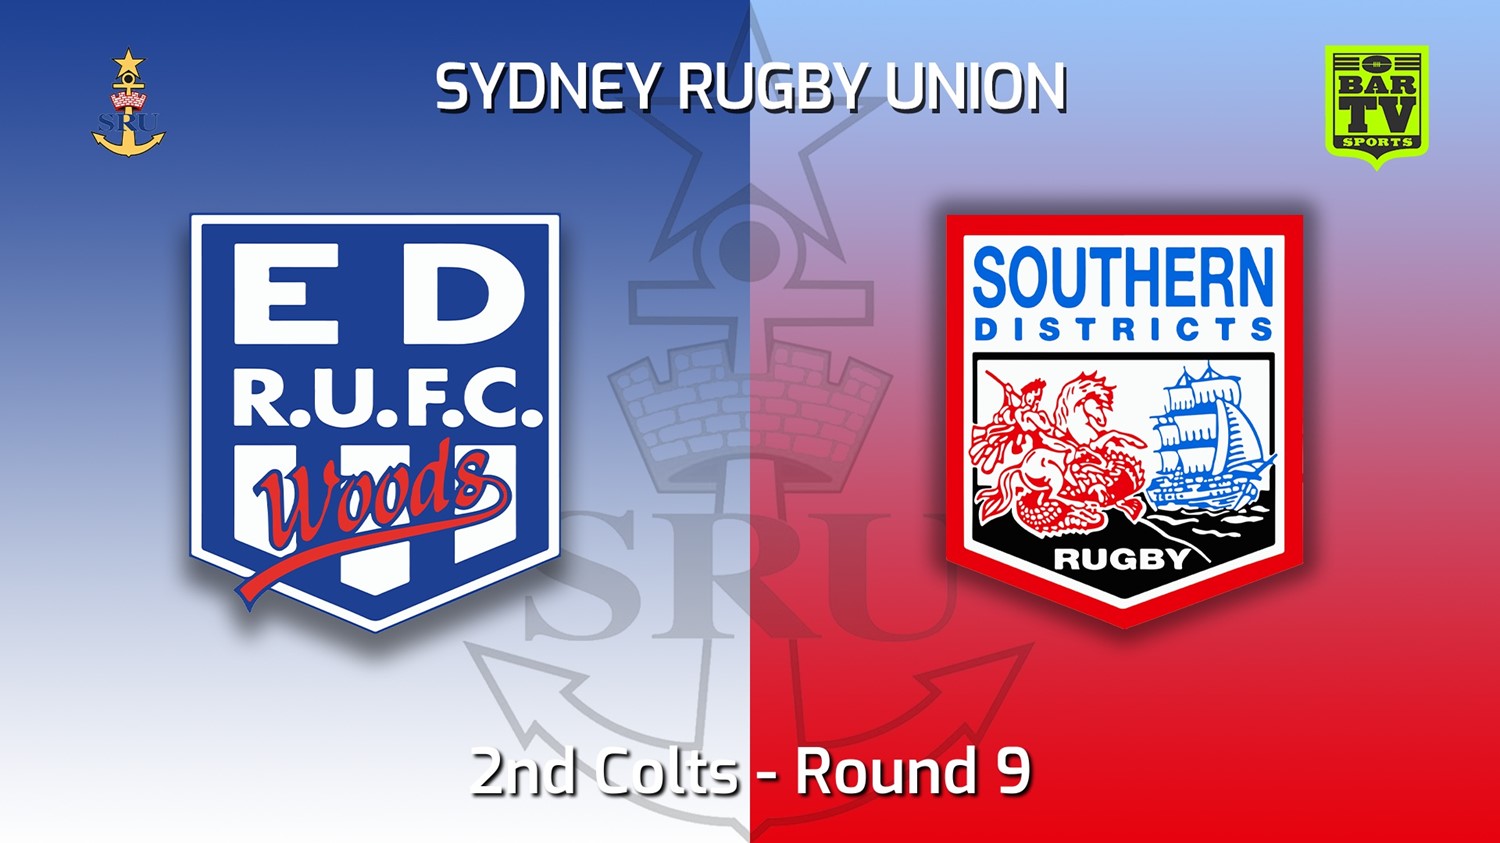 220528-Sydney Rugby Union Round 9 - 2nd Colts - Eastwood v Southern Districts Slate Image